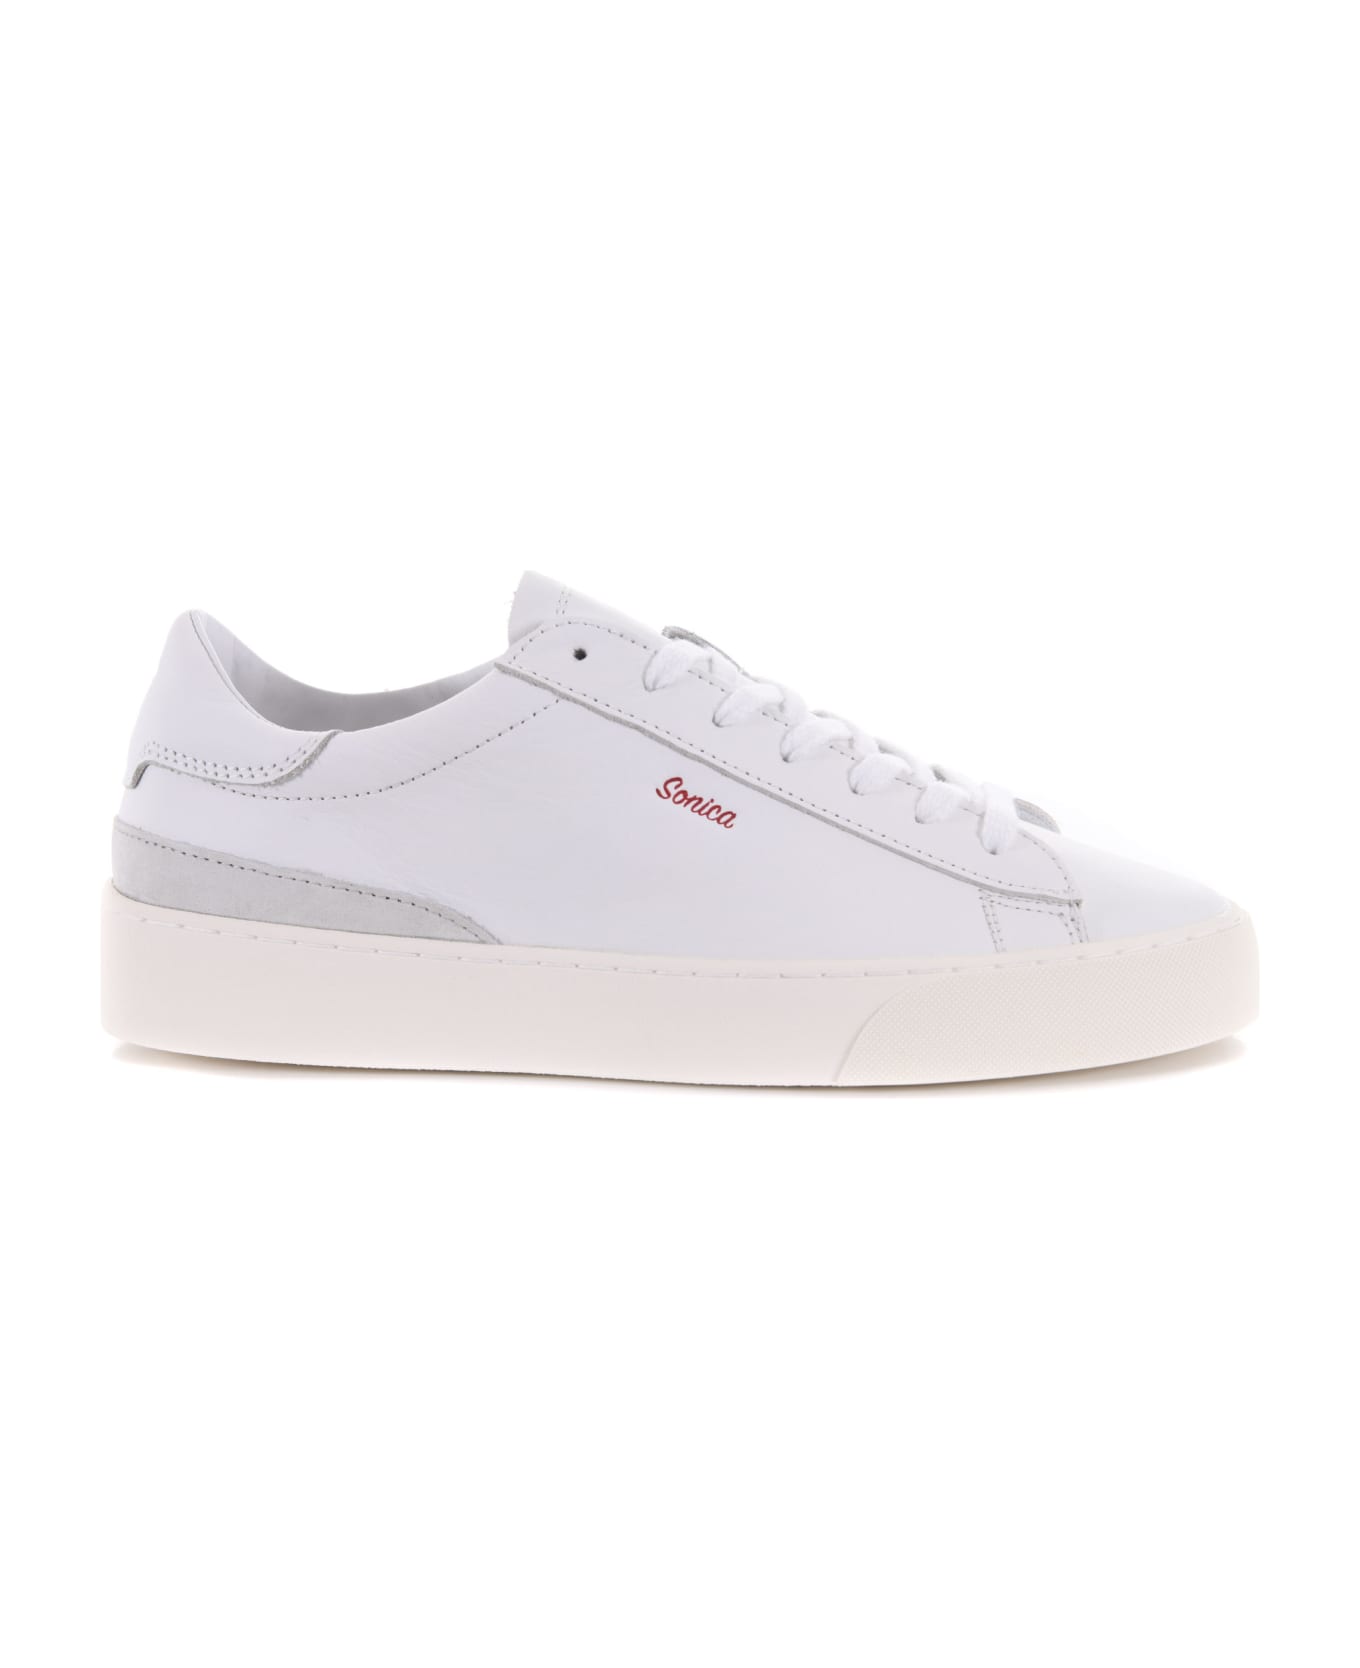 D.A.T.E. Men's Sneakers Leather. - Bianco